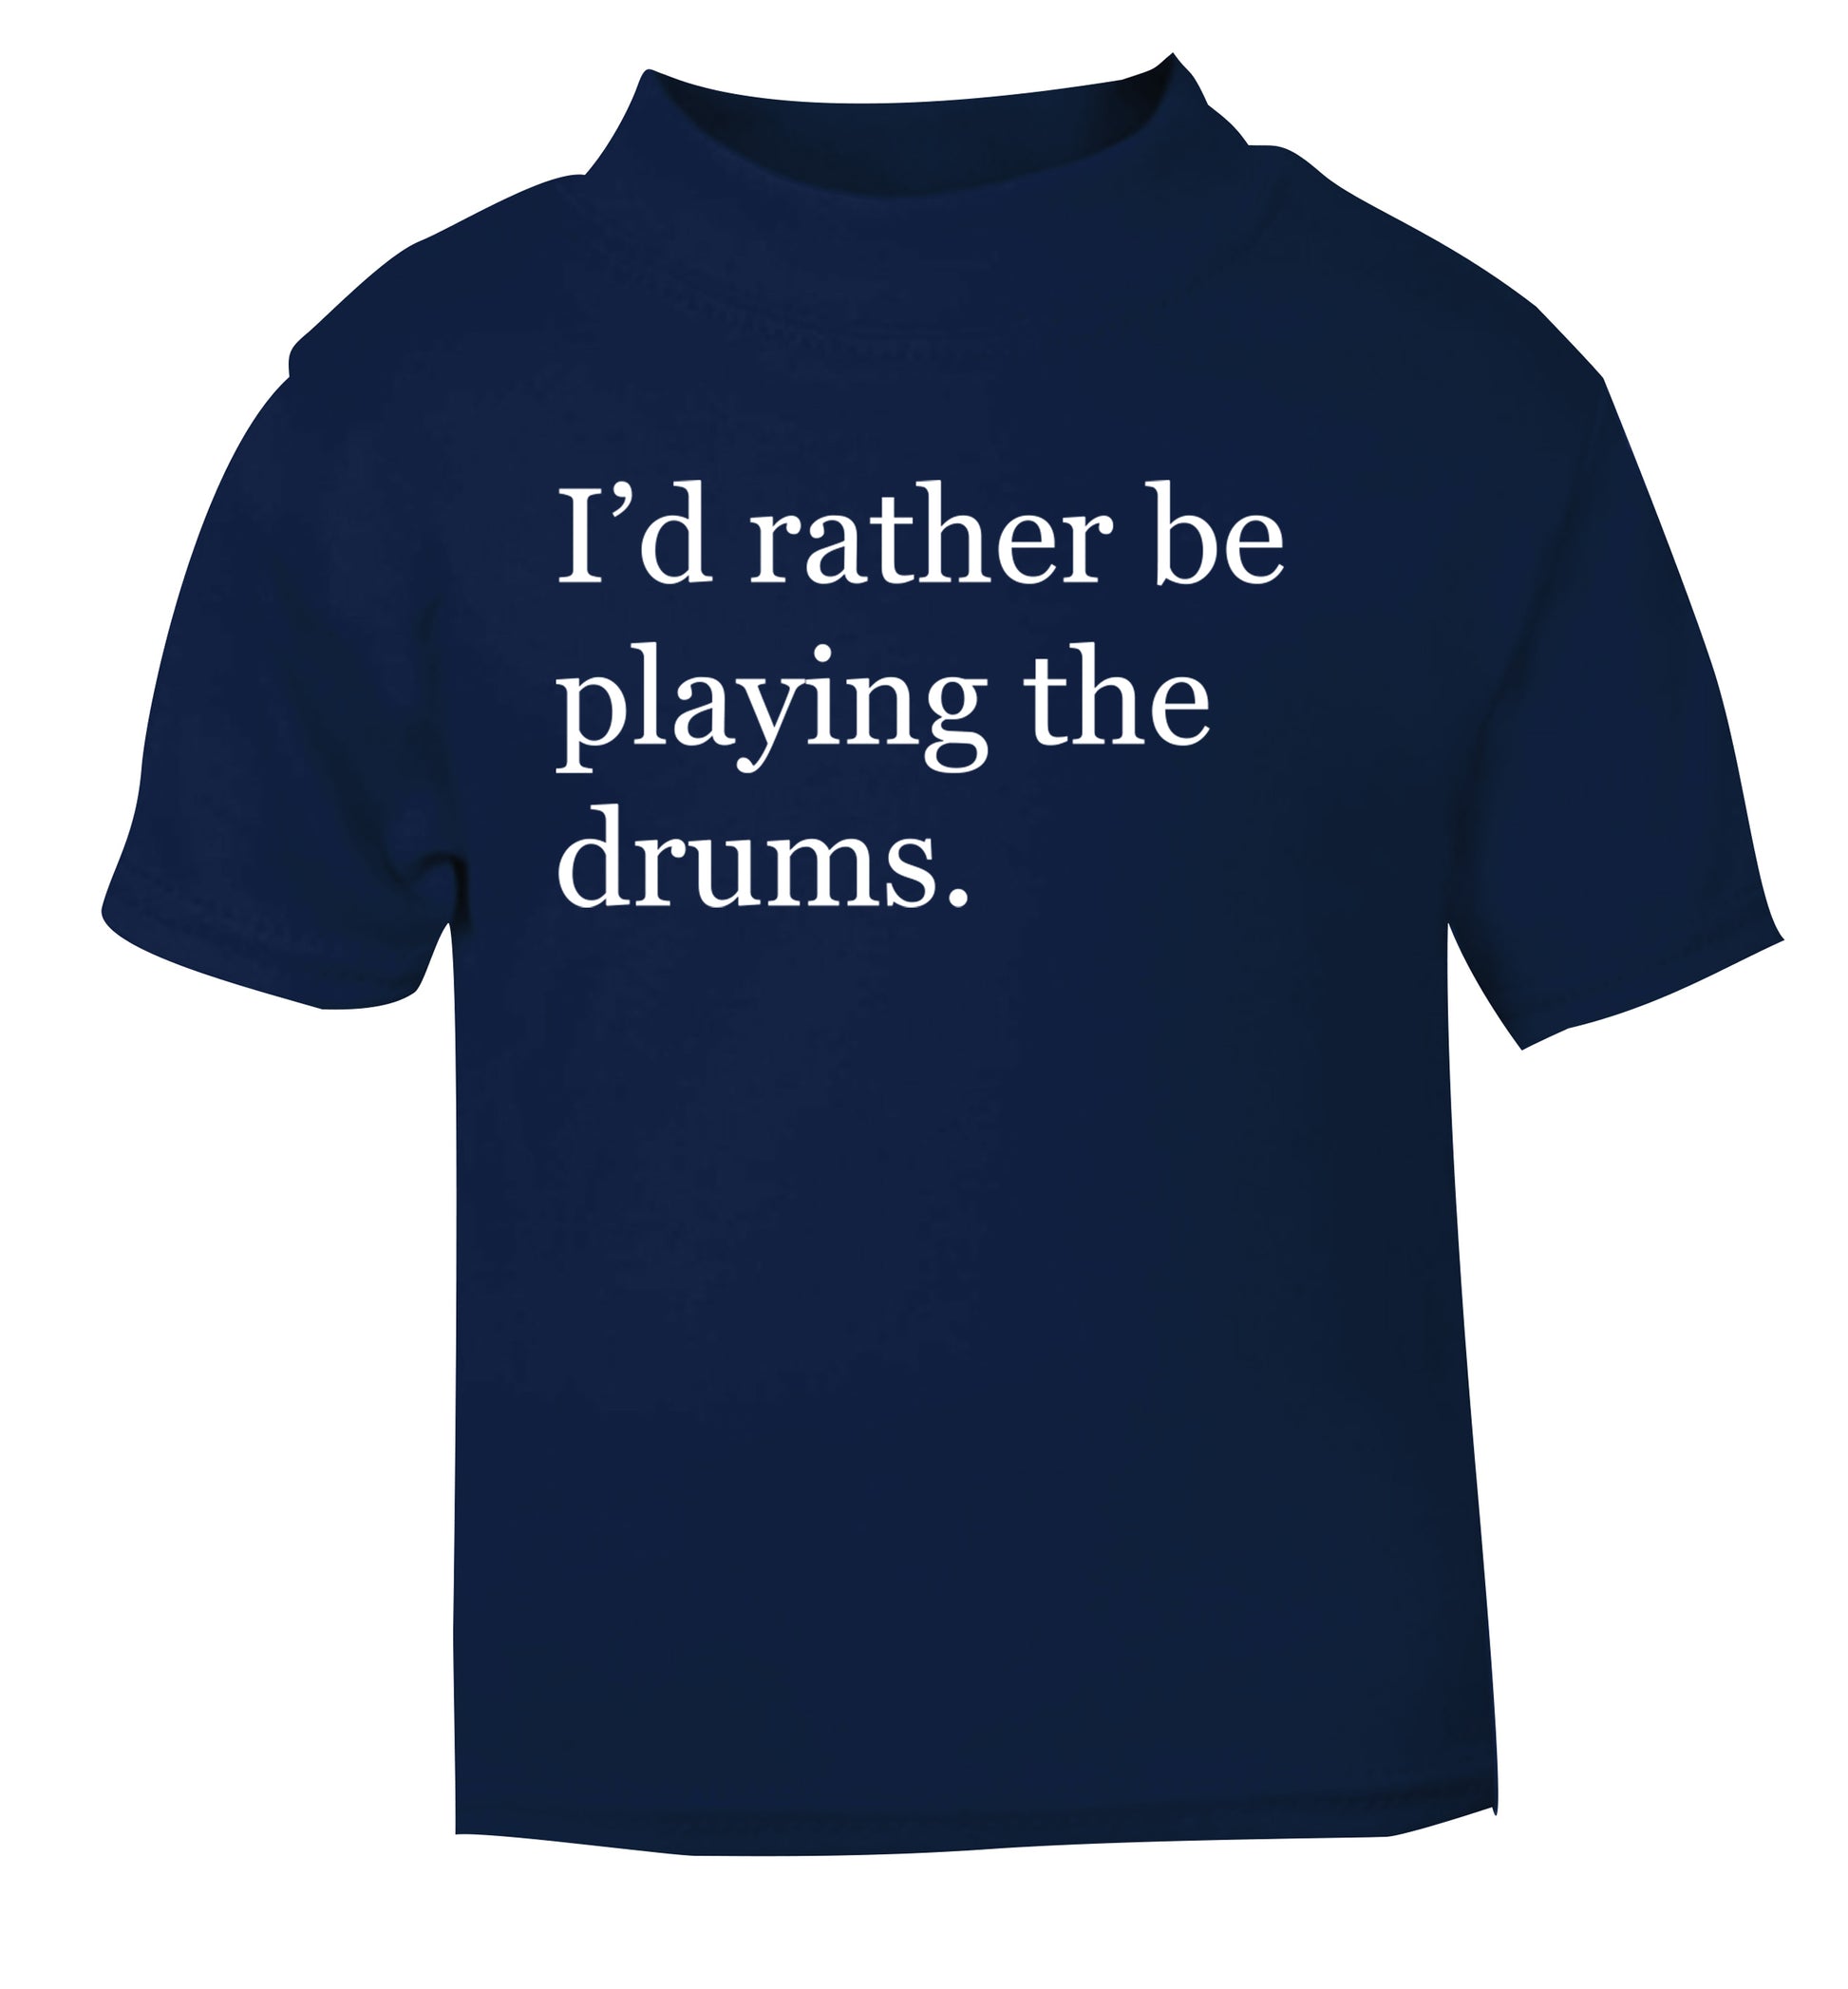 I'd rather be playing the drums navy Baby Toddler Tshirt 2 Years